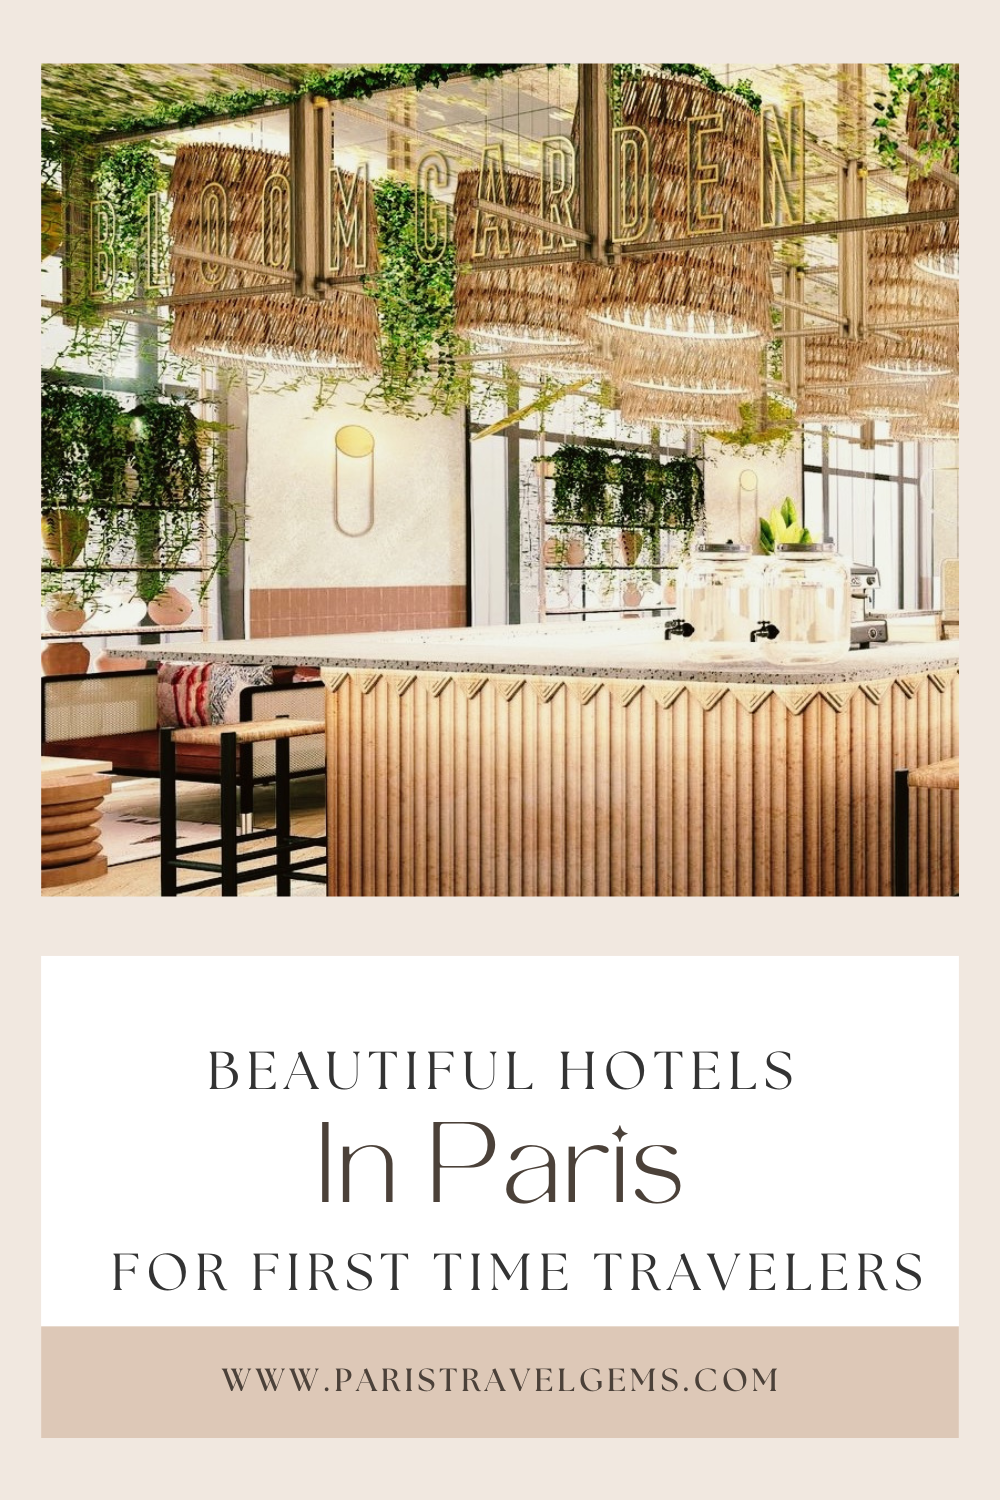 Beautiful Hotels in Paris for first time travelers